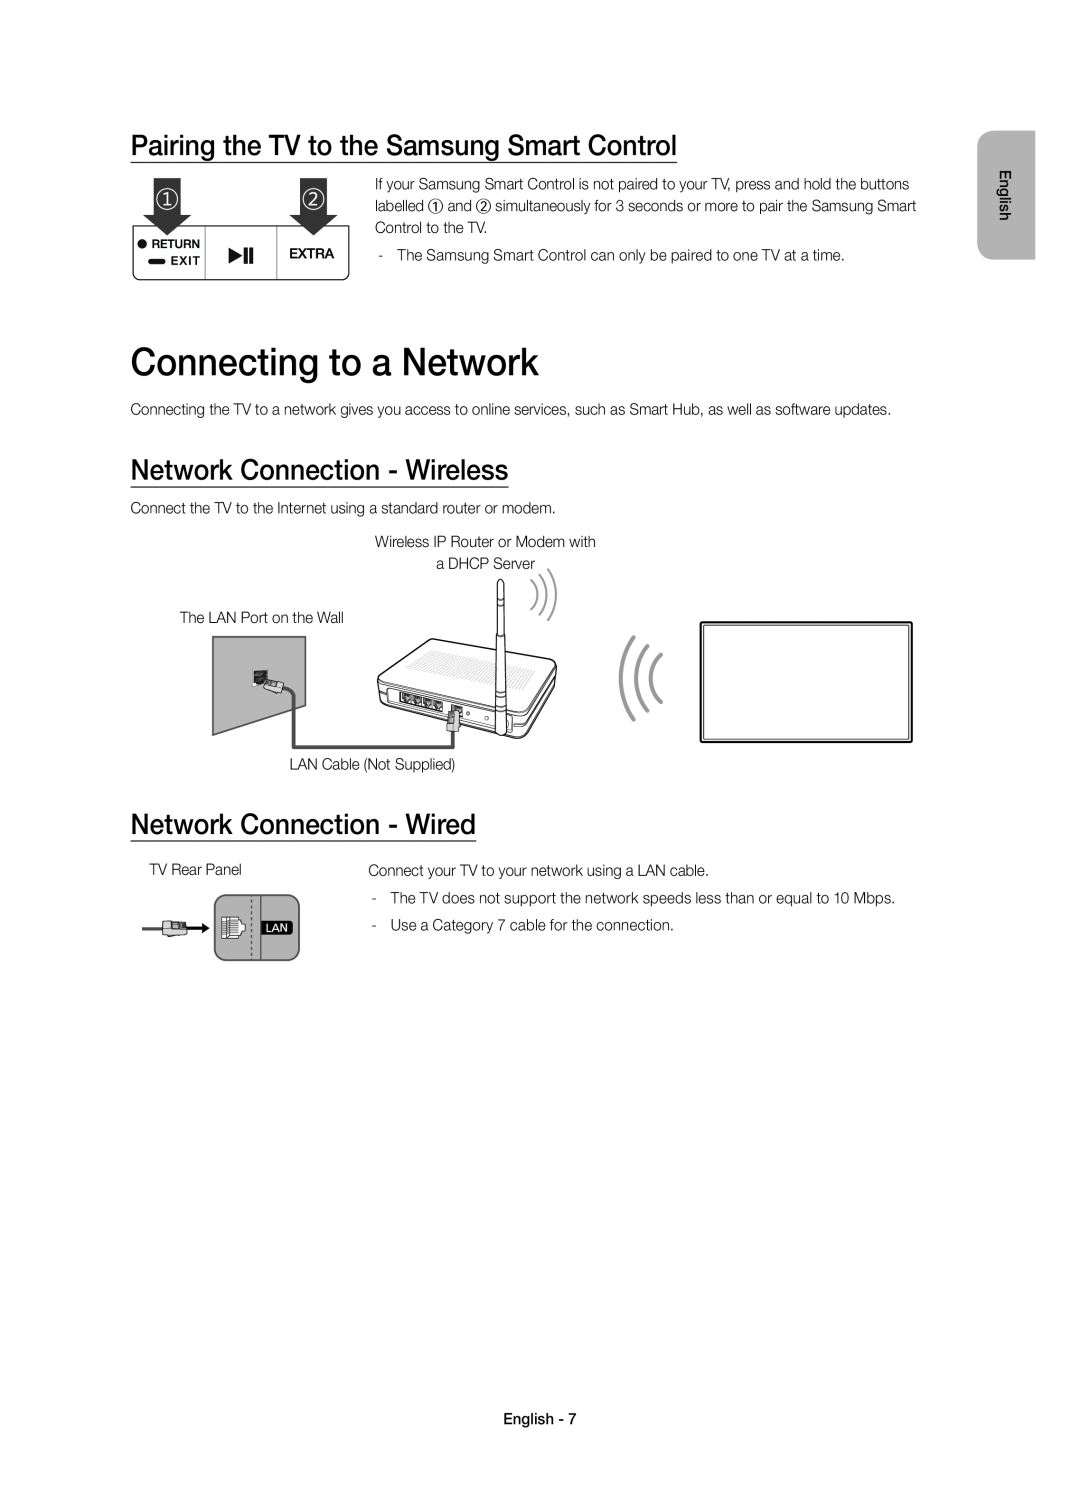 Samsung UE65JU7500TXXC Connecting to a Network, Pairing the TV to the Samsung Smart Control, Network Connection - Wireless 